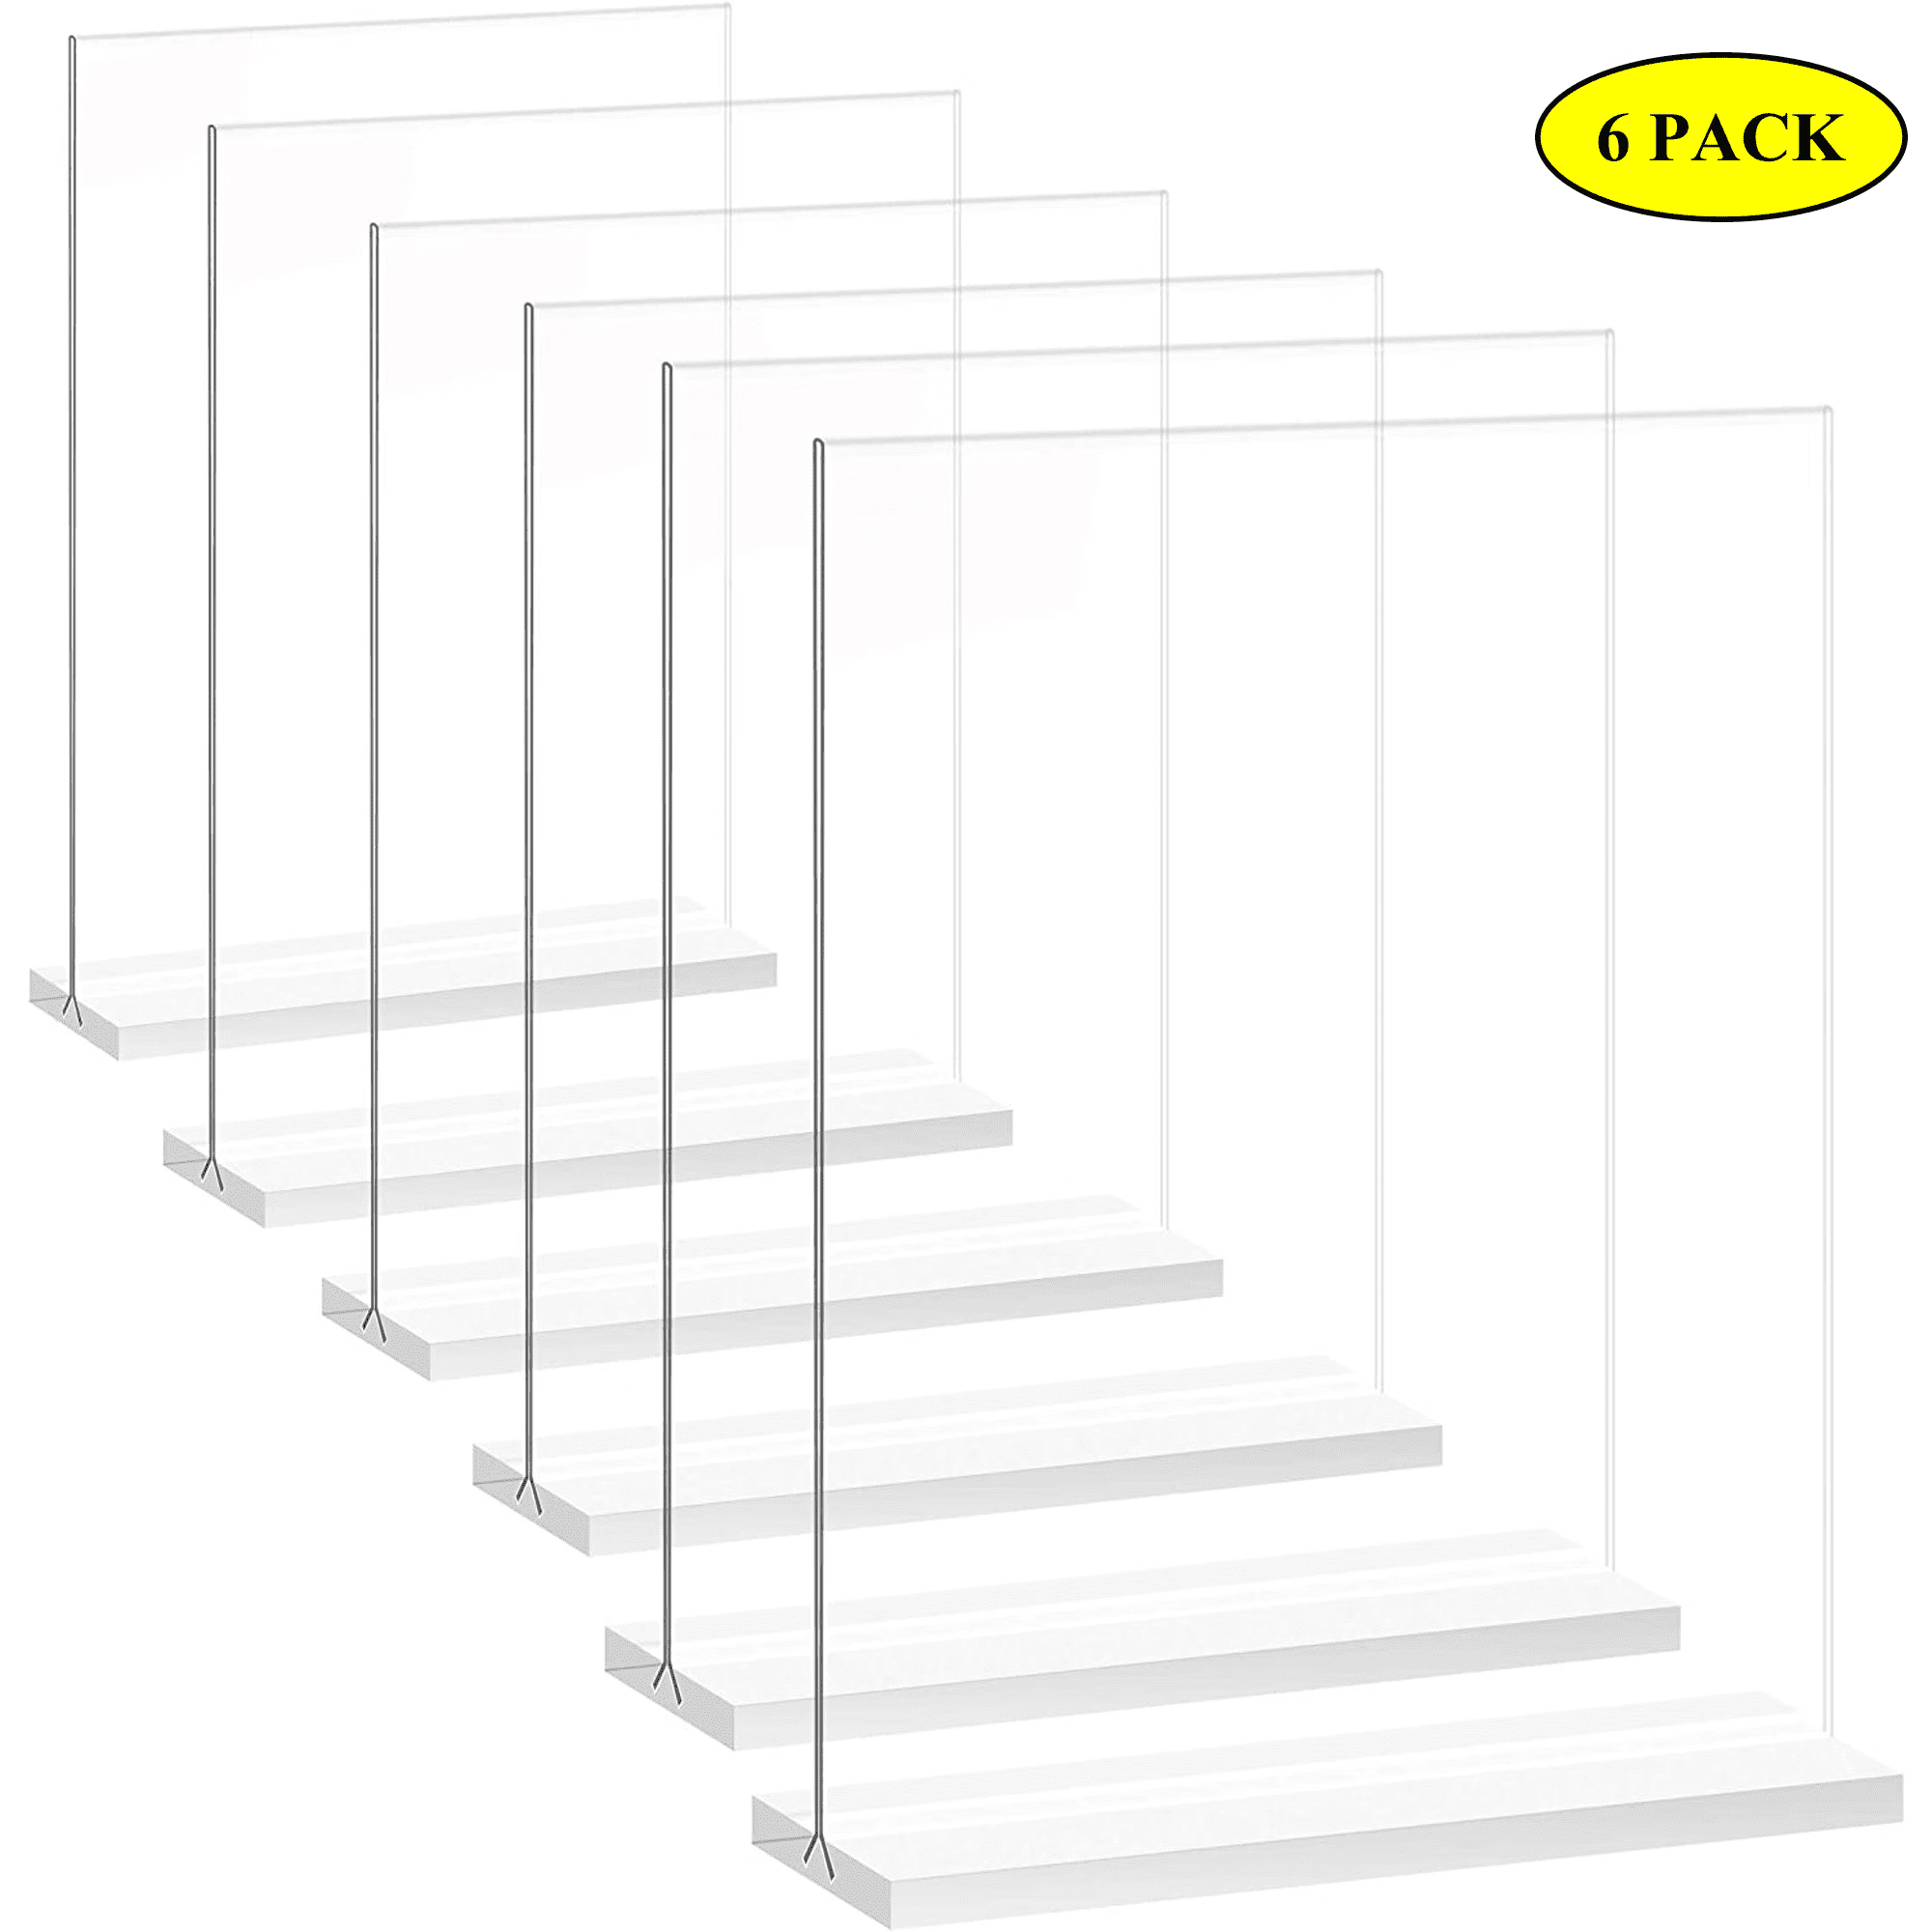 RT3TN9H Oruuum 6 Pcs Acrylic Sign Holder L-Shape Menu Display Stand Poster  Holders for Display Picture Holder Stand - 10x15cm